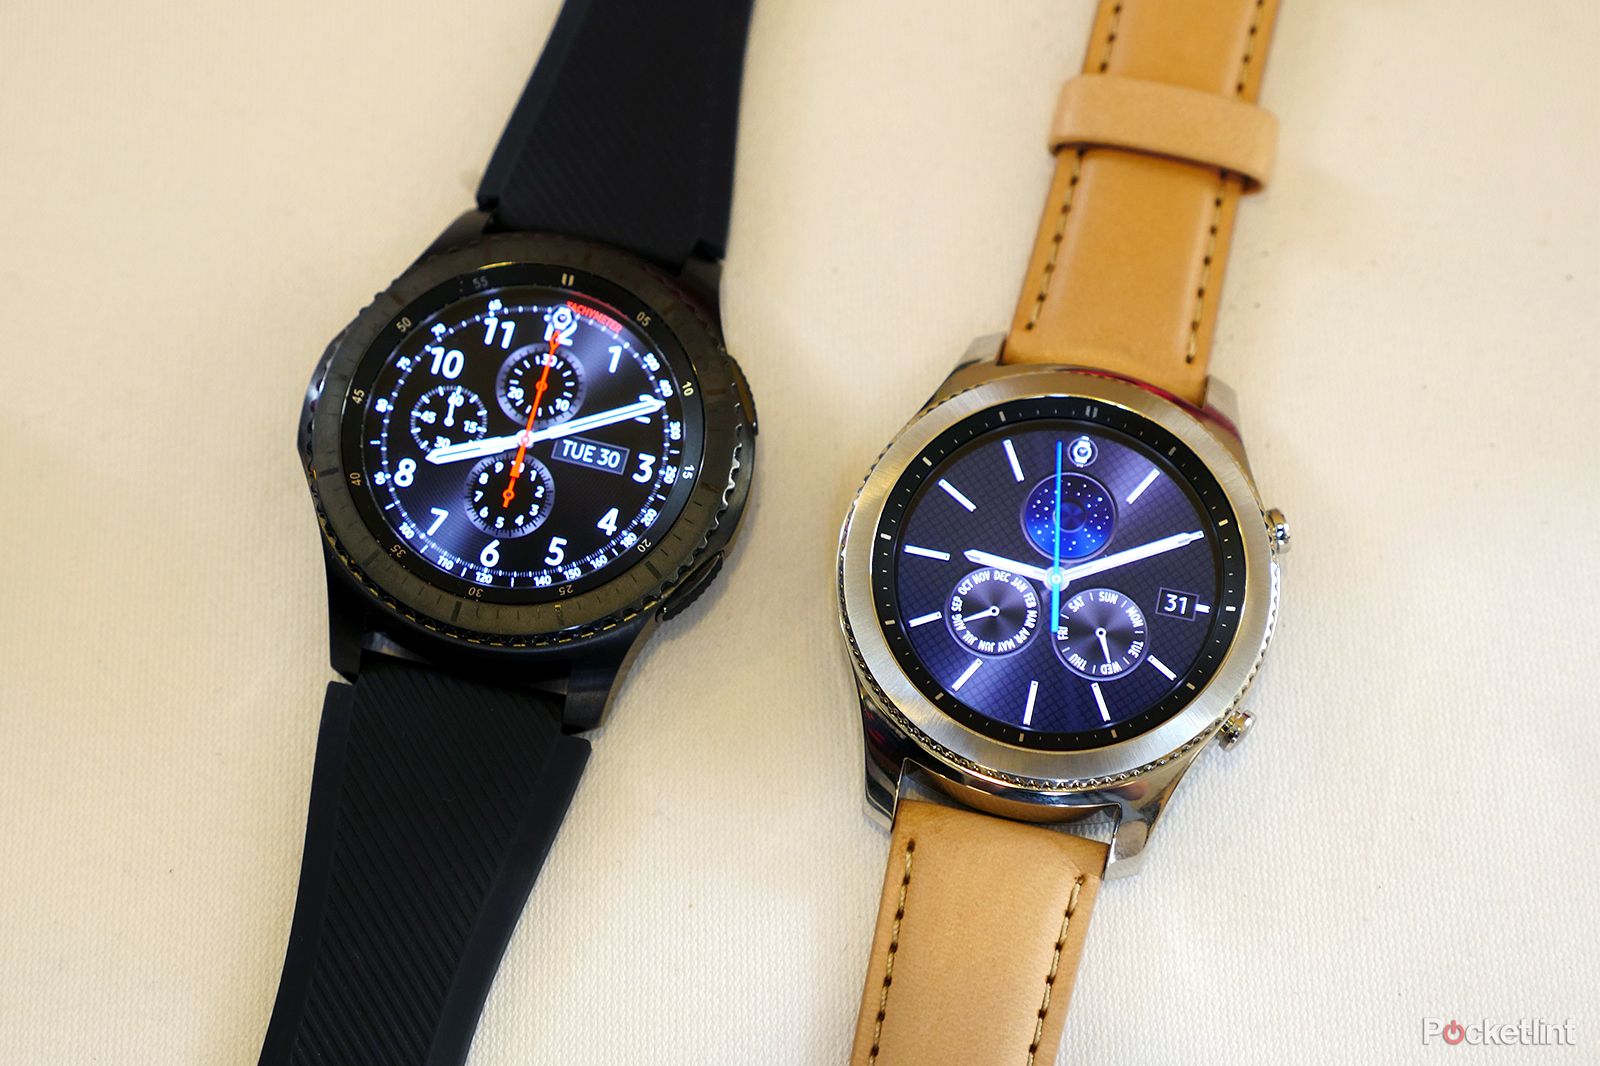 samsung gear devices can now be used with the iphone image 1